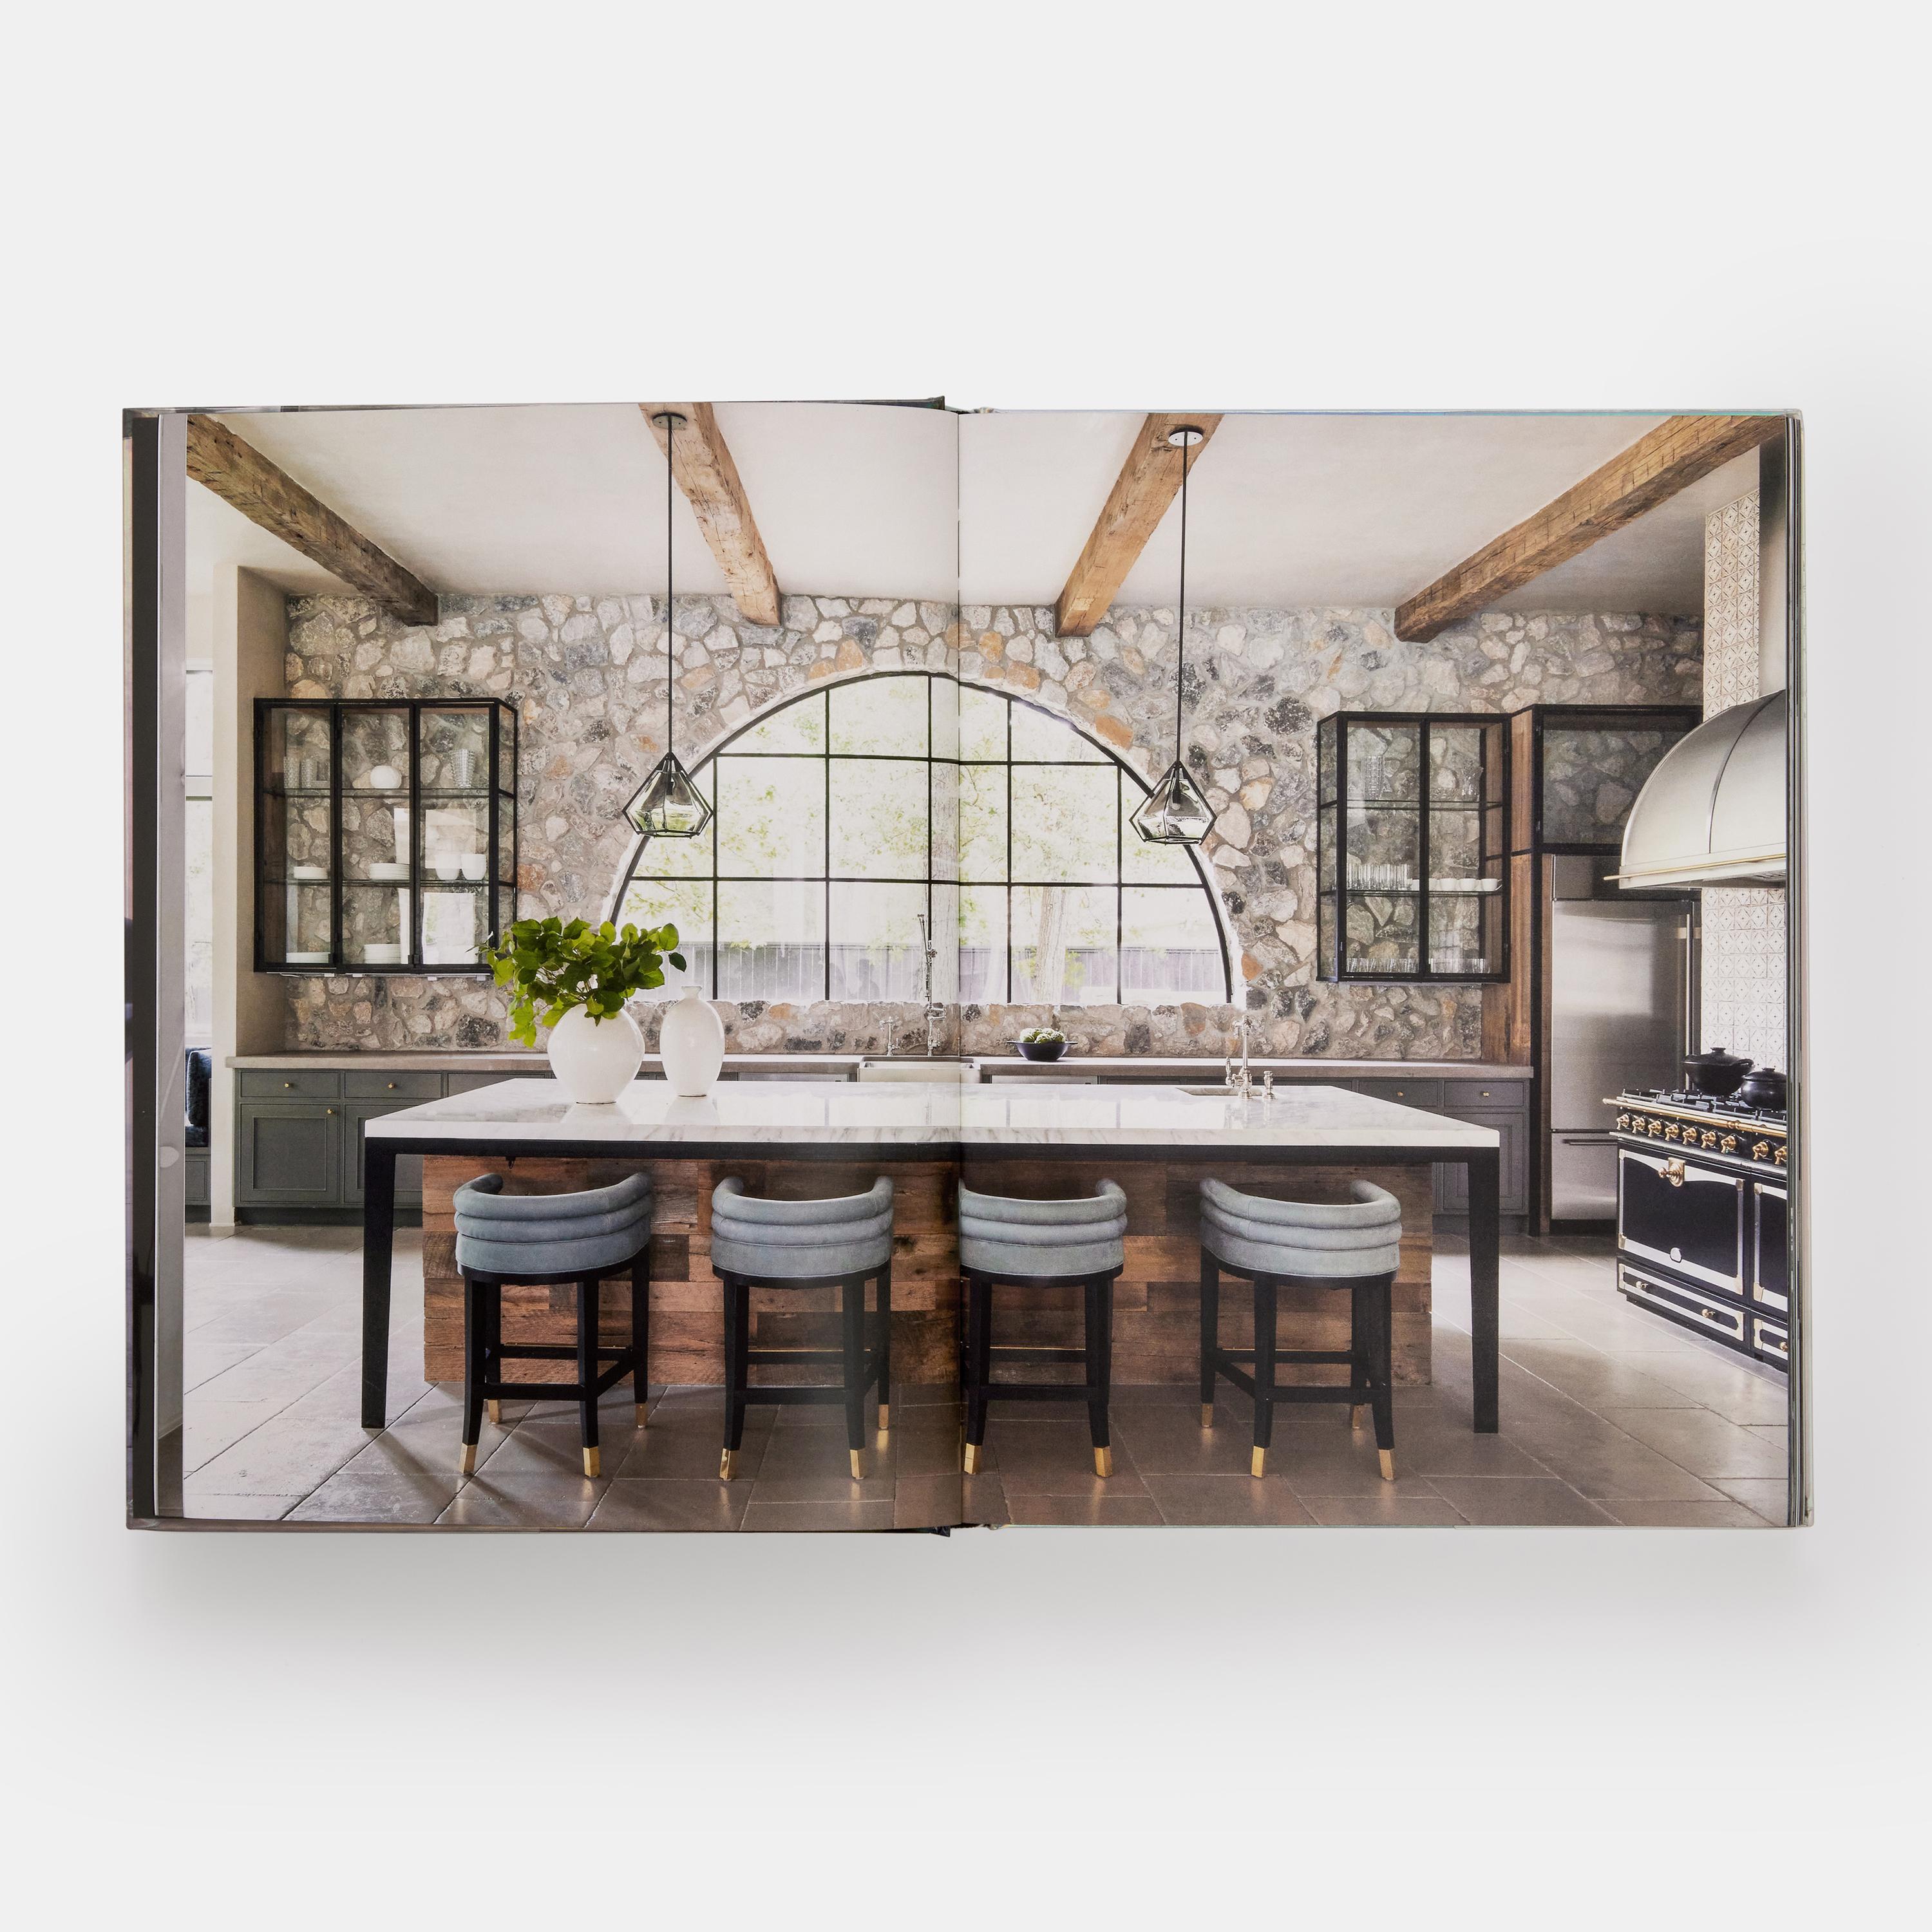 The first monograph of interior designer Nina Magon, featuring the glamorous spaces that have made her sought-after by jet-set clientele

Growing up in Houston, yet born in Canada, interior designer Nina Magon would frequently return to India with